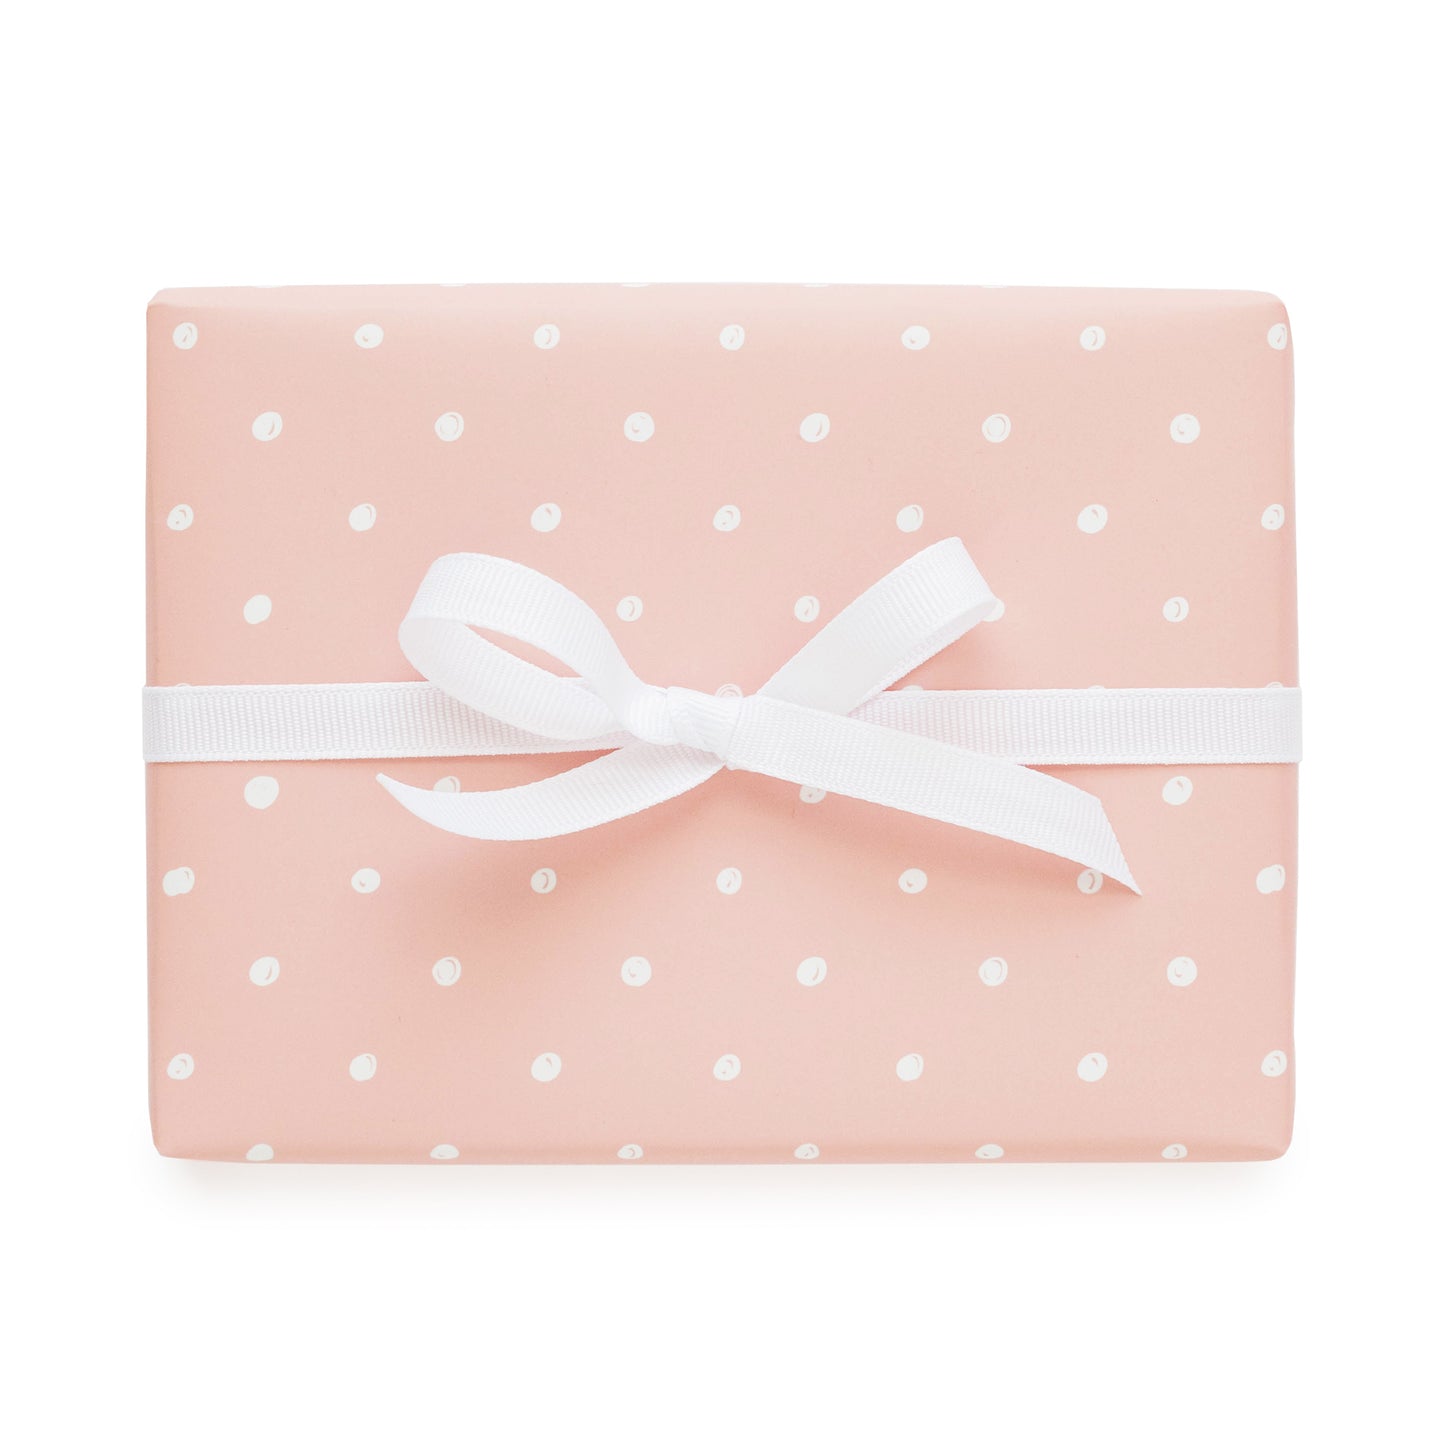 rose gift wrap with imperfect white dots and white bow